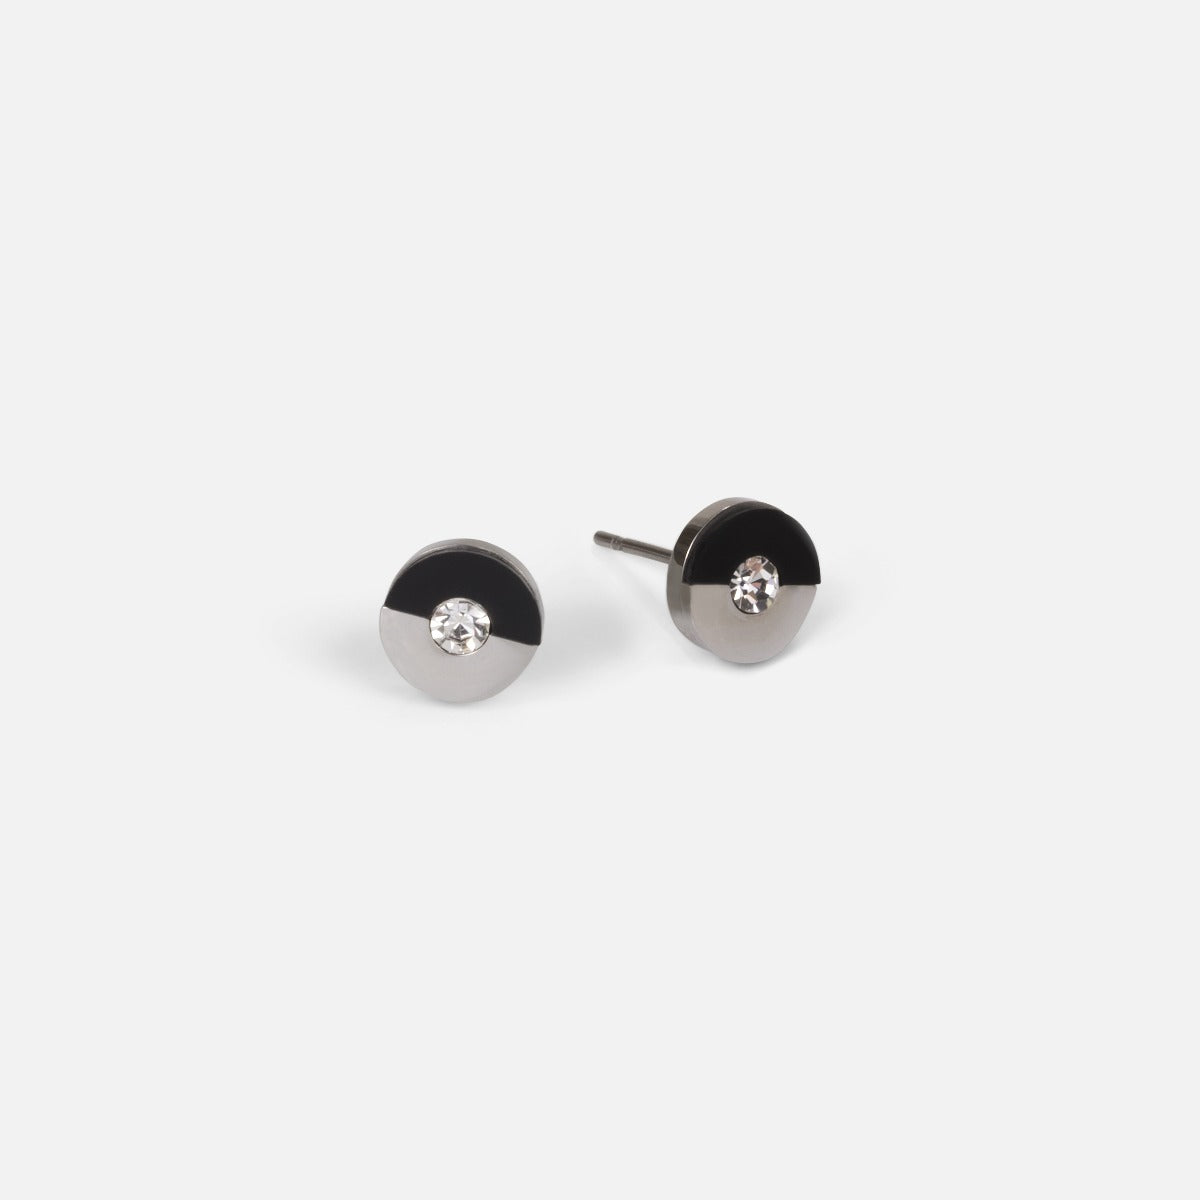 Small two tones stainless steel stud earrings   